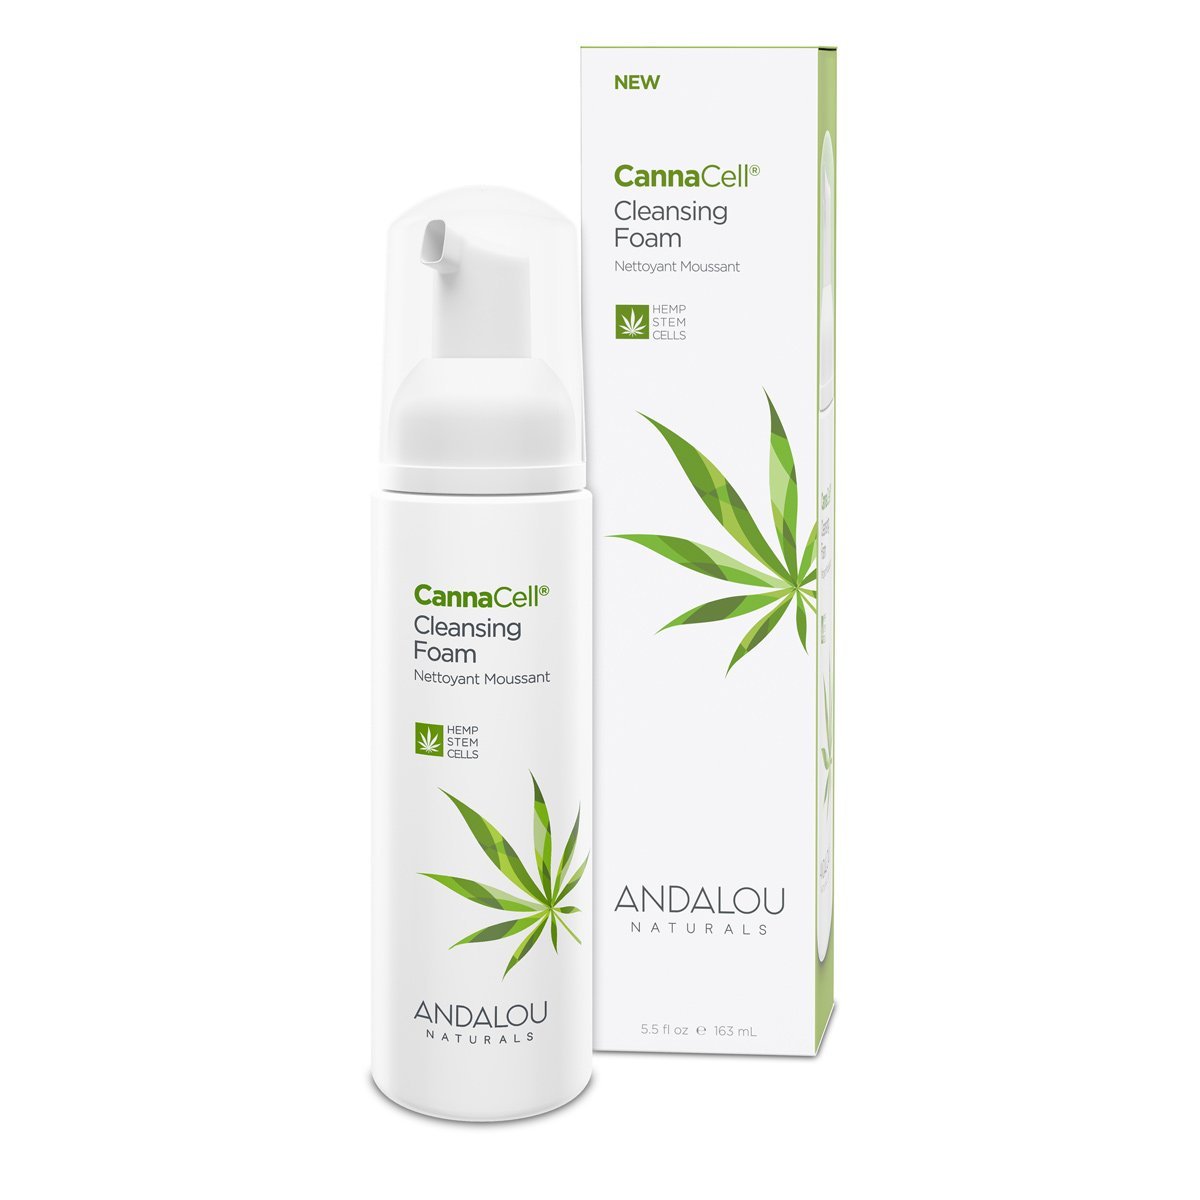 CannaCell Cleansing Foam - Andalou Naturals US